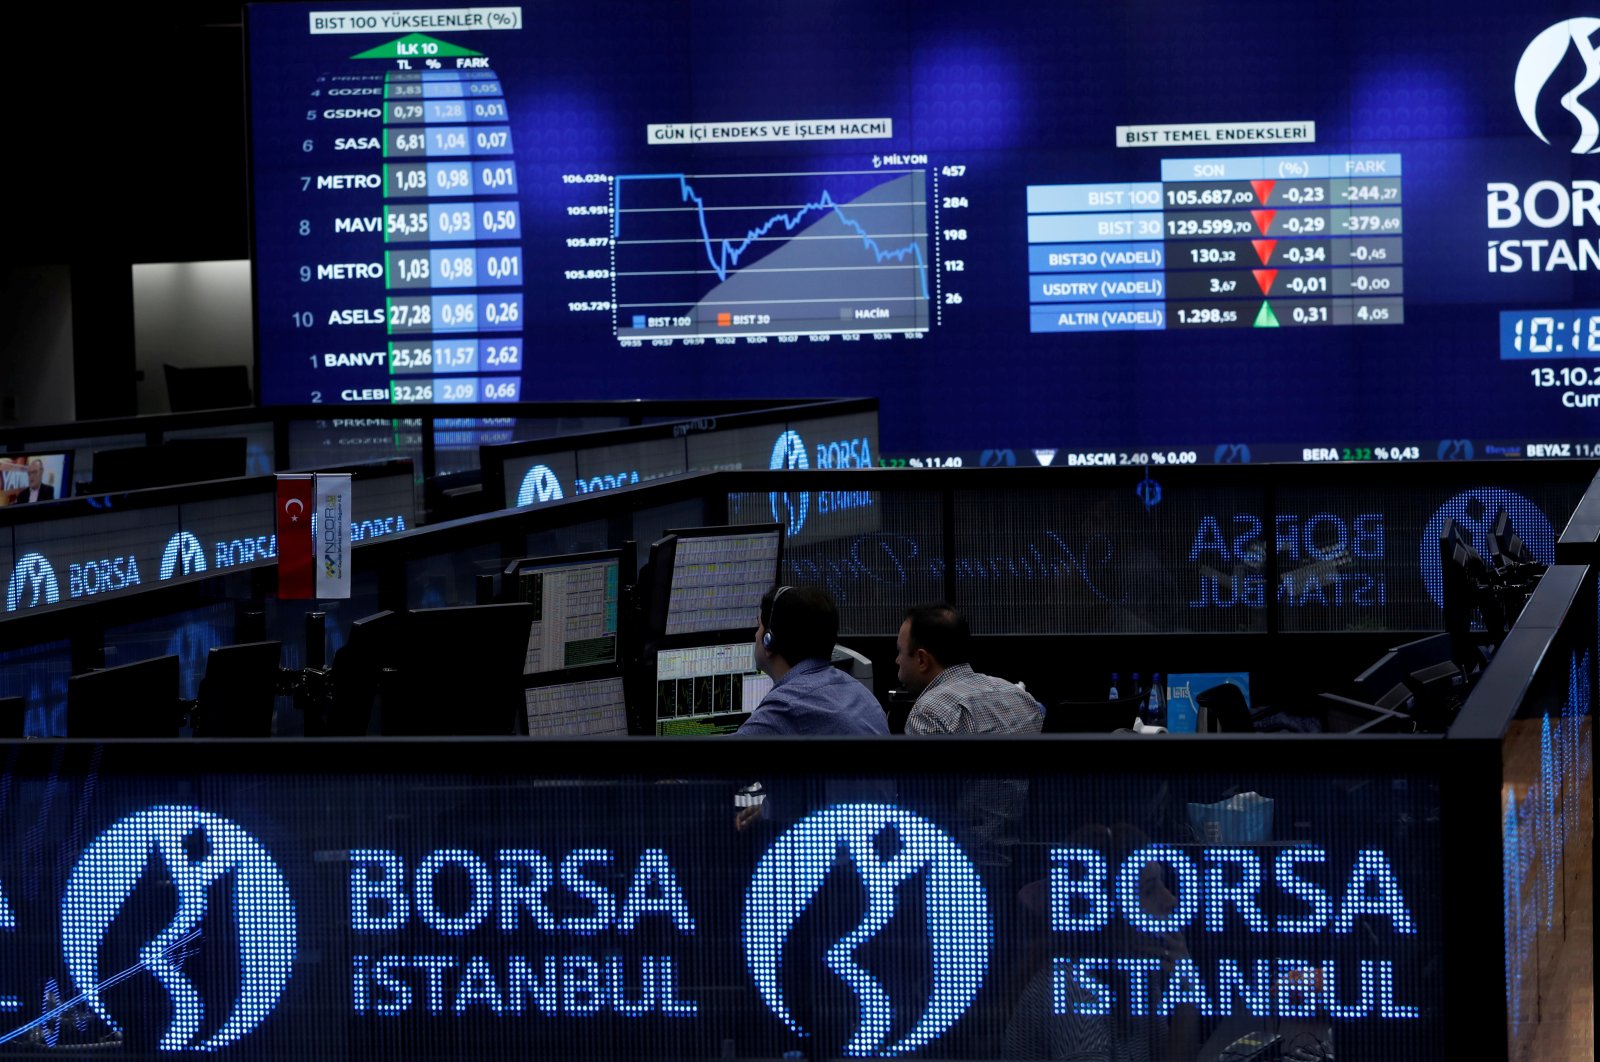 Traders work at their desks on the floor of the Borsa Istanbul Stock Exchange (BIST) in Istanbul, Turkey, Oct. 13, 2017. (Reuters Photo)